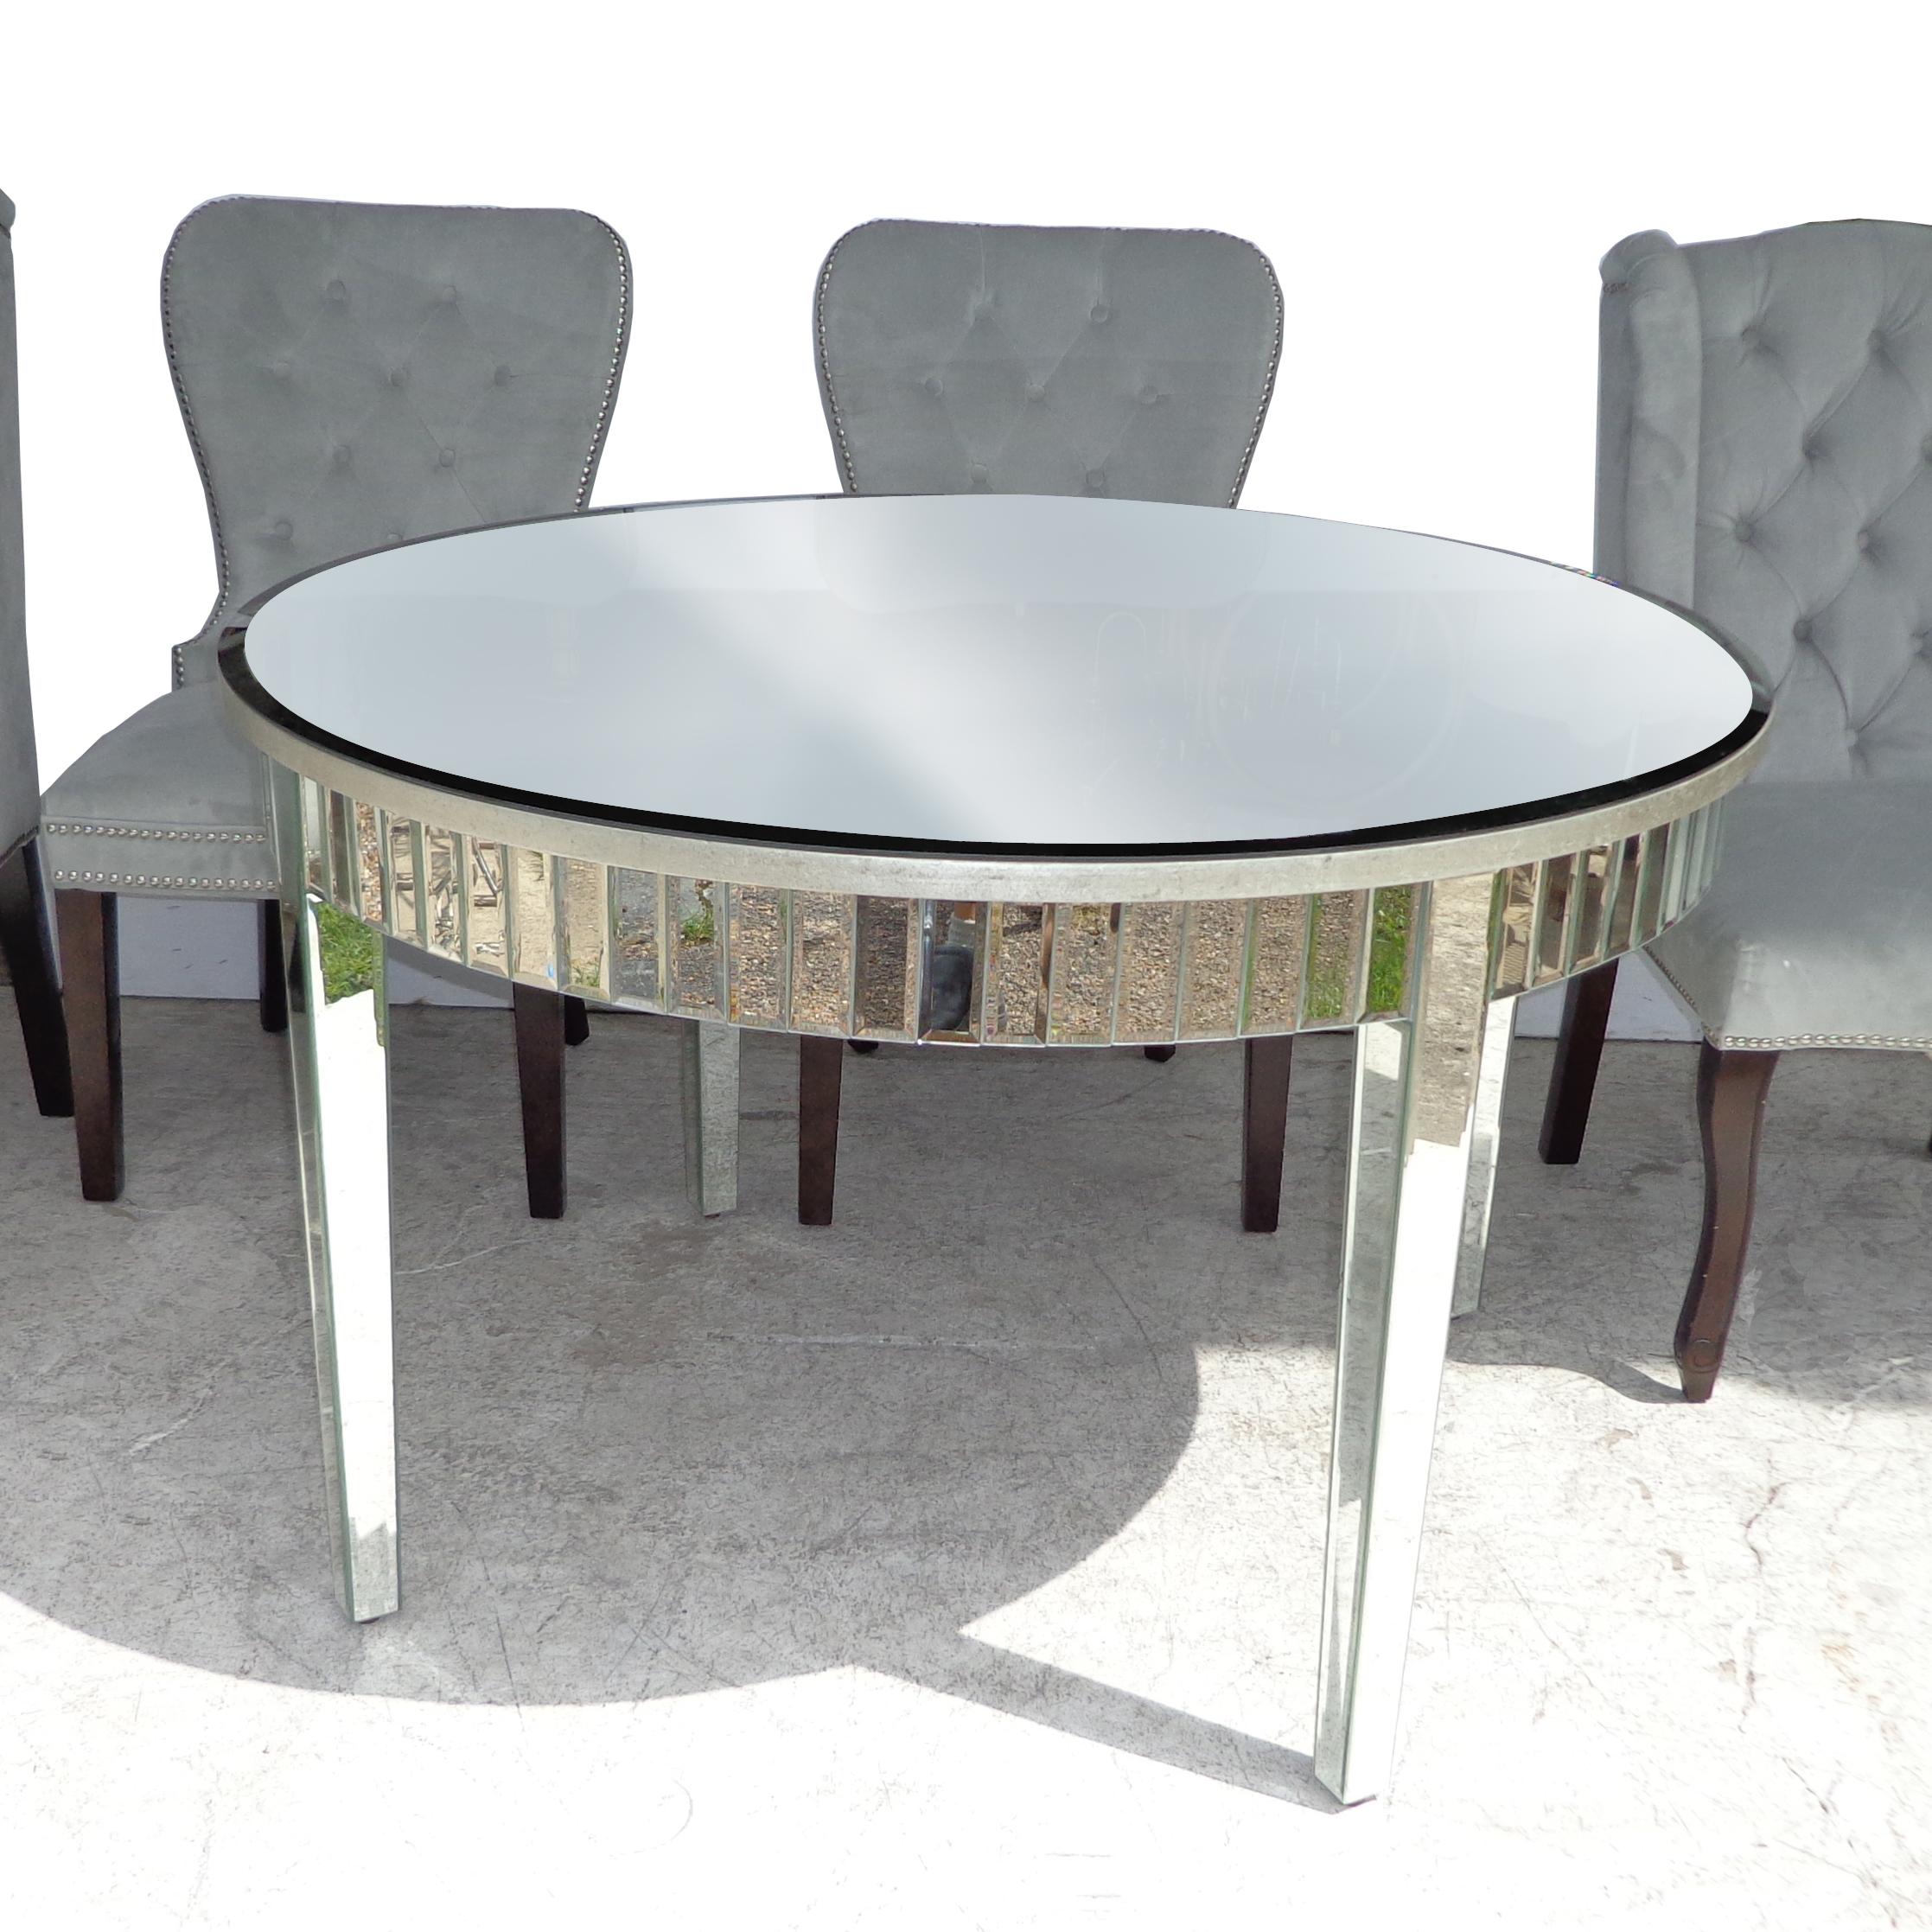 Hollywood Regency style mirrored table and chairs by Z Gallerie

Fully mirrored 47.5? dining table with 4 arm and side chairs.

Measures: Table : 47.75? Diameter x 30? Height

2 Archer dining chairs:
Wing back chairs : 23? Width x 24? Depth x